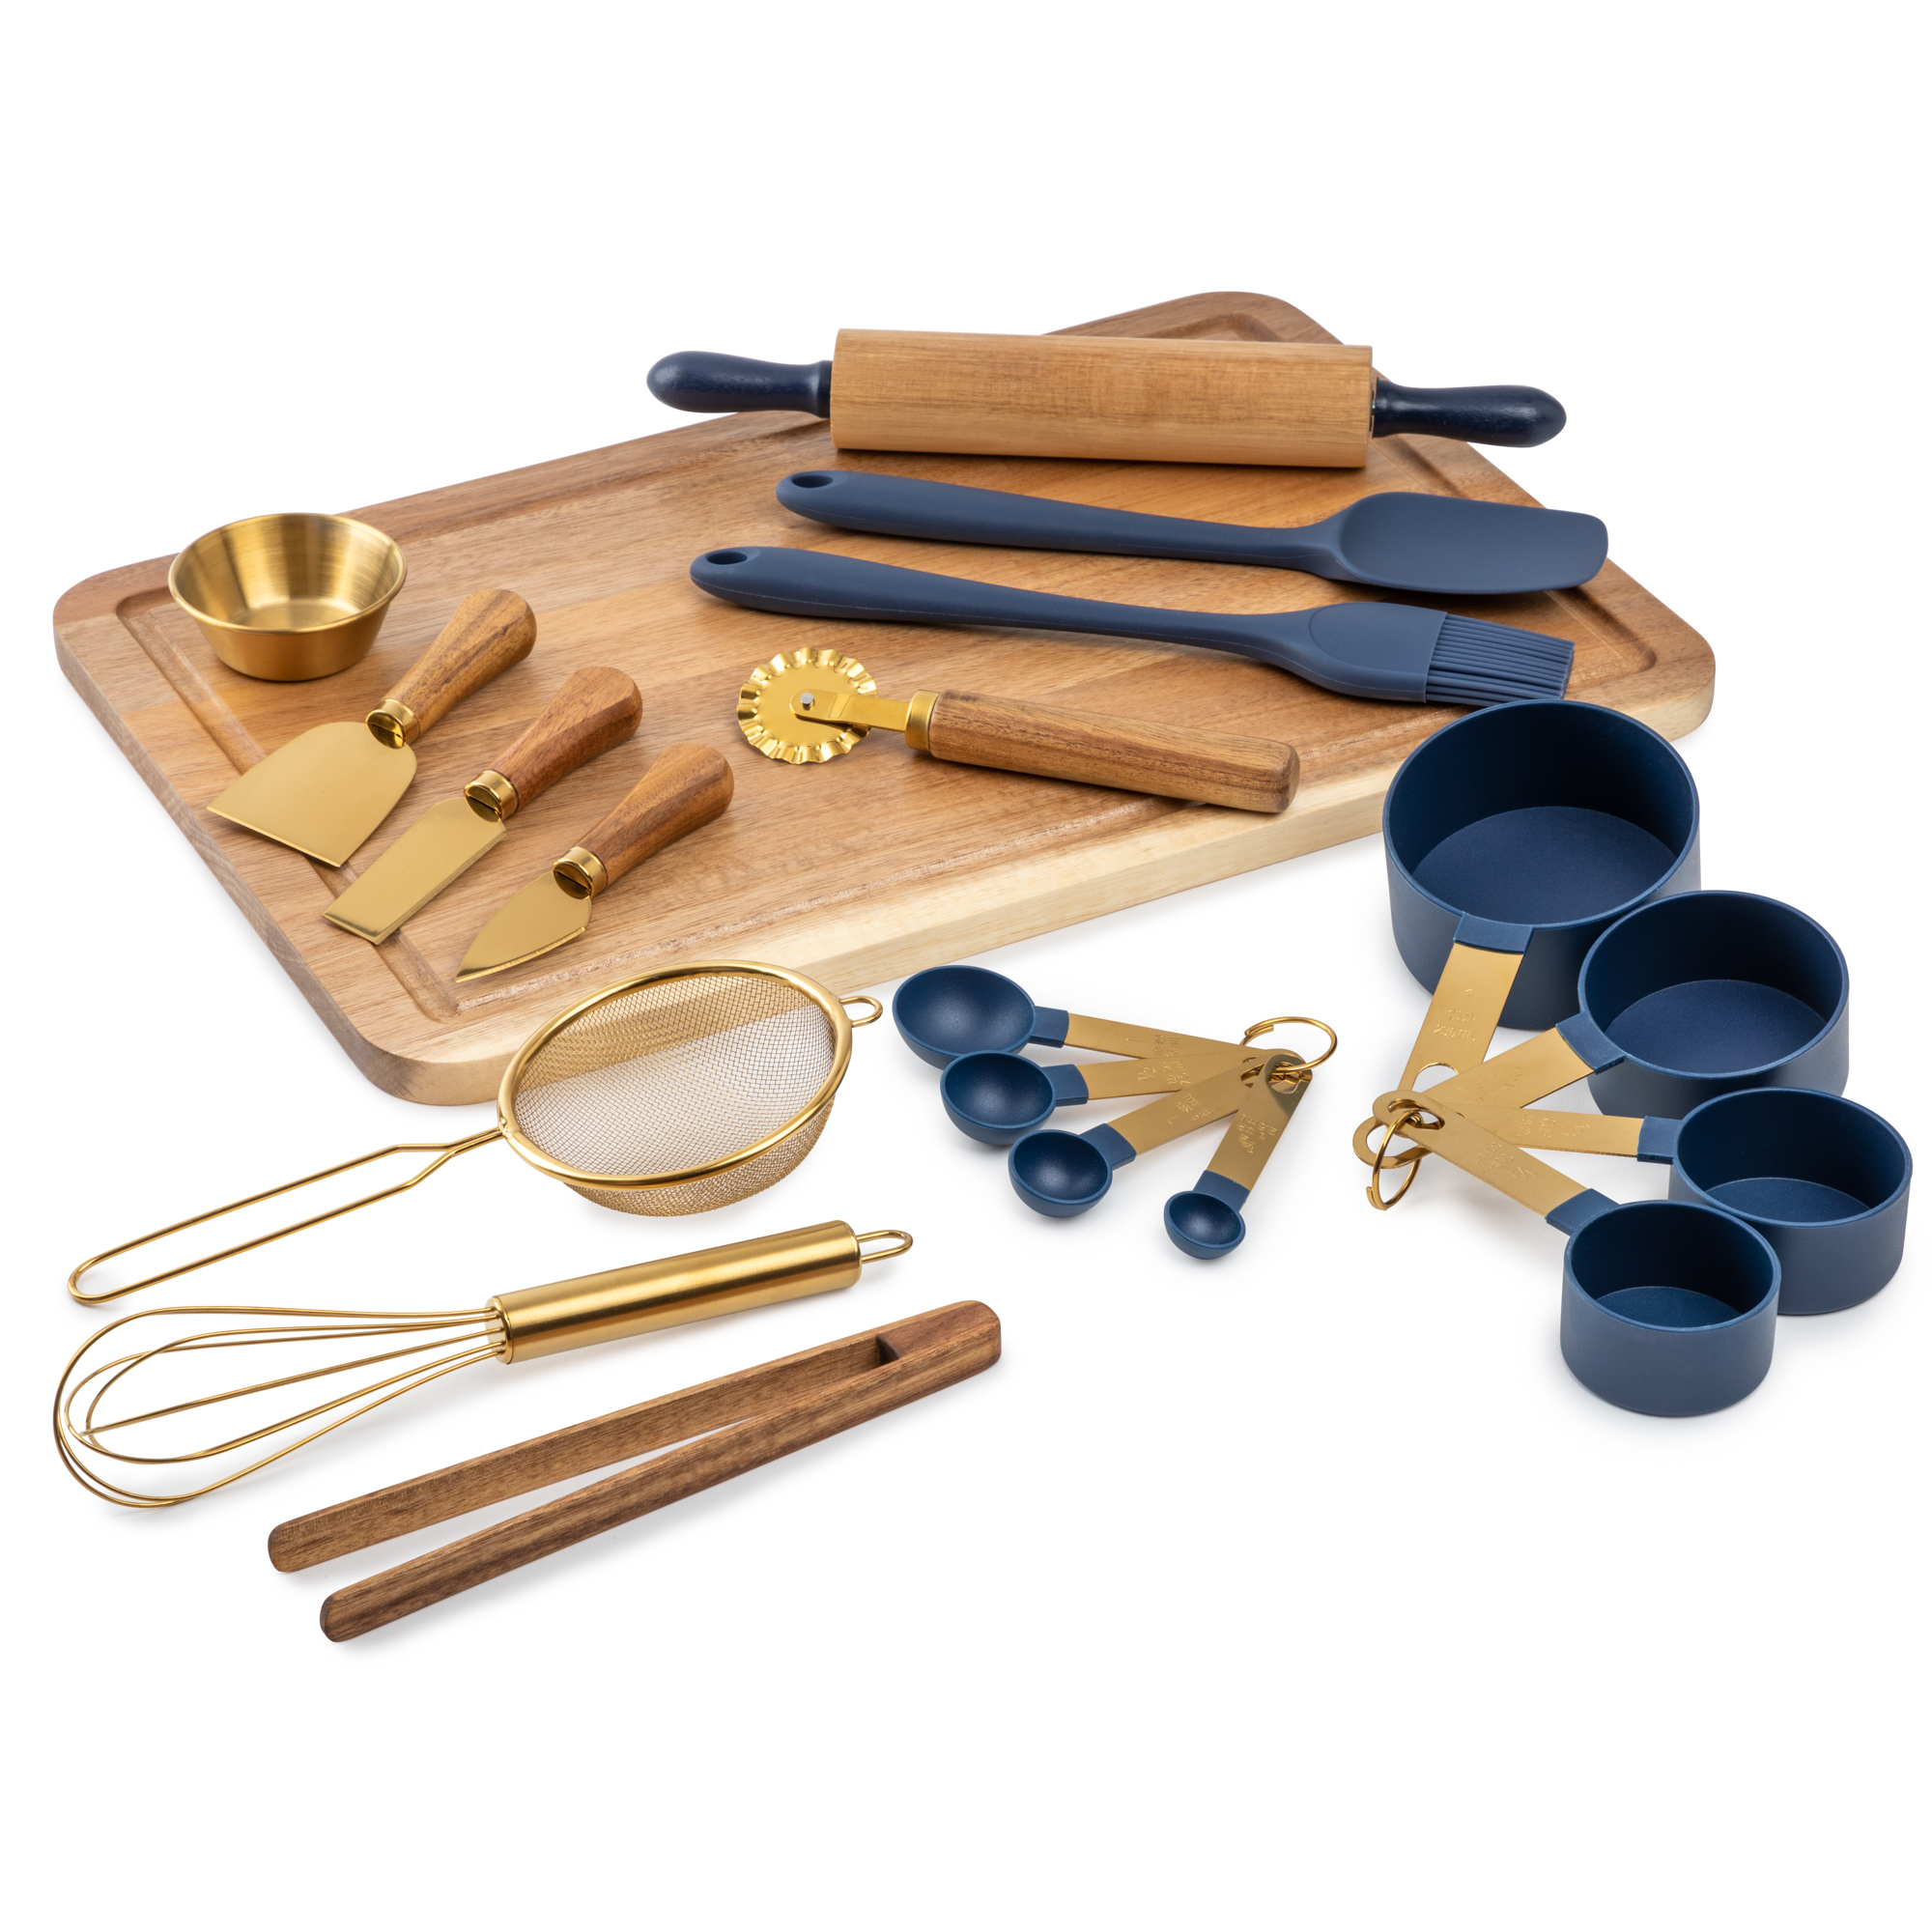 Thyme & Table Wood Board & Silicone Baking Set, 20-Pieces - image 1 of 7